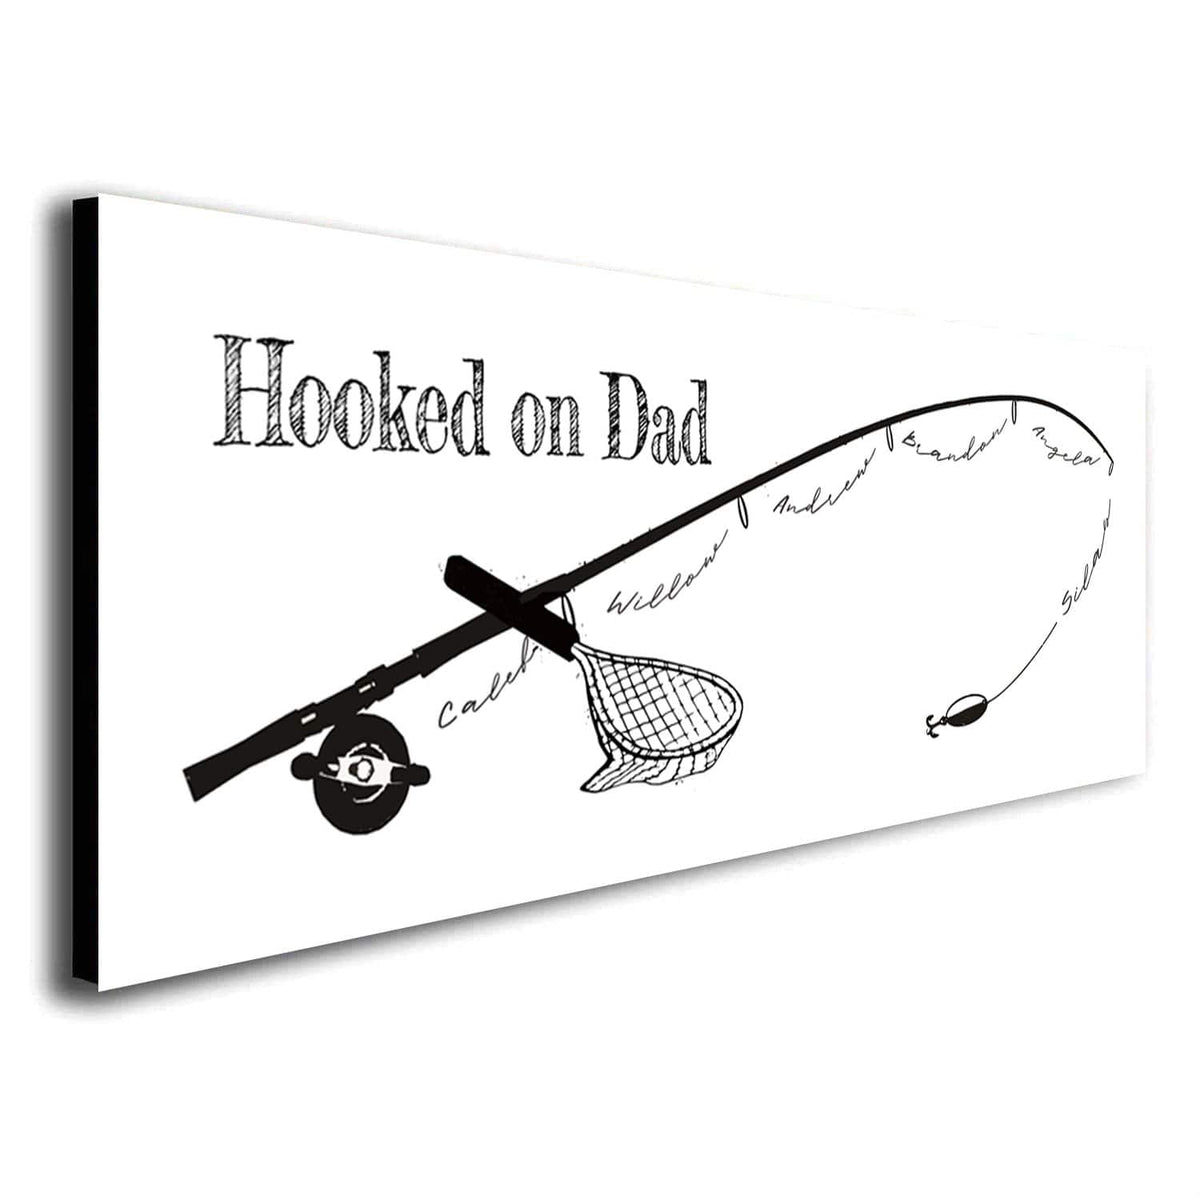 Hooked on Dad - Personalized gift for fisherman dad